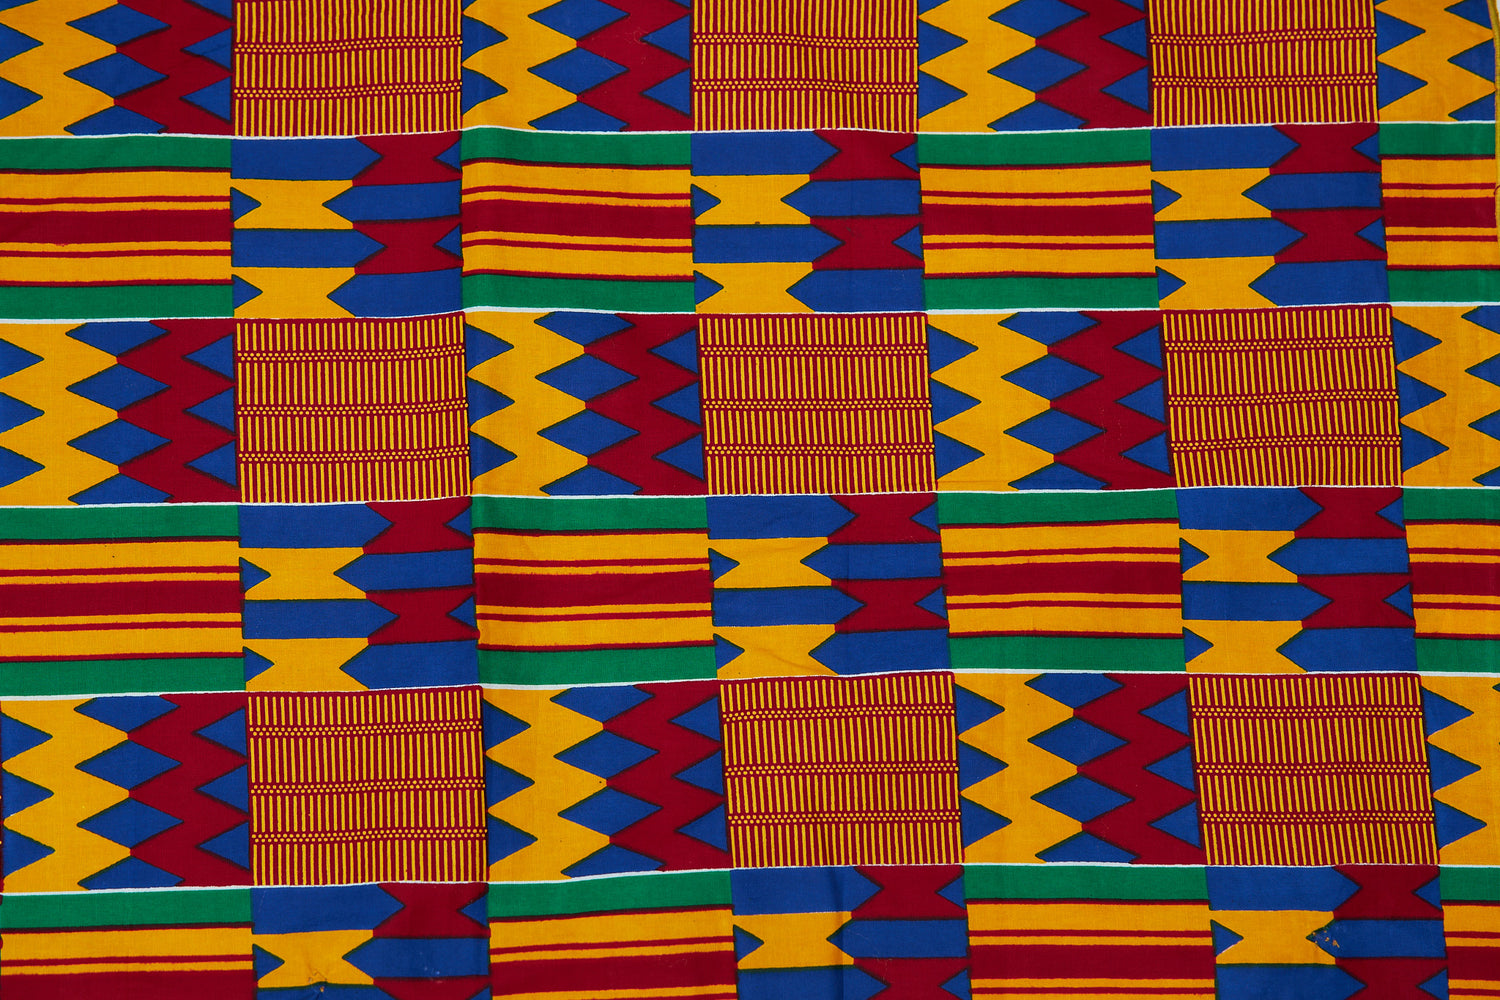 Ghanaian Print Kente High Quality Cotton Wax,made of Red, Blue, Yellow And Green Colourful Adinkira Symbols Detachable Silklined Headwrap